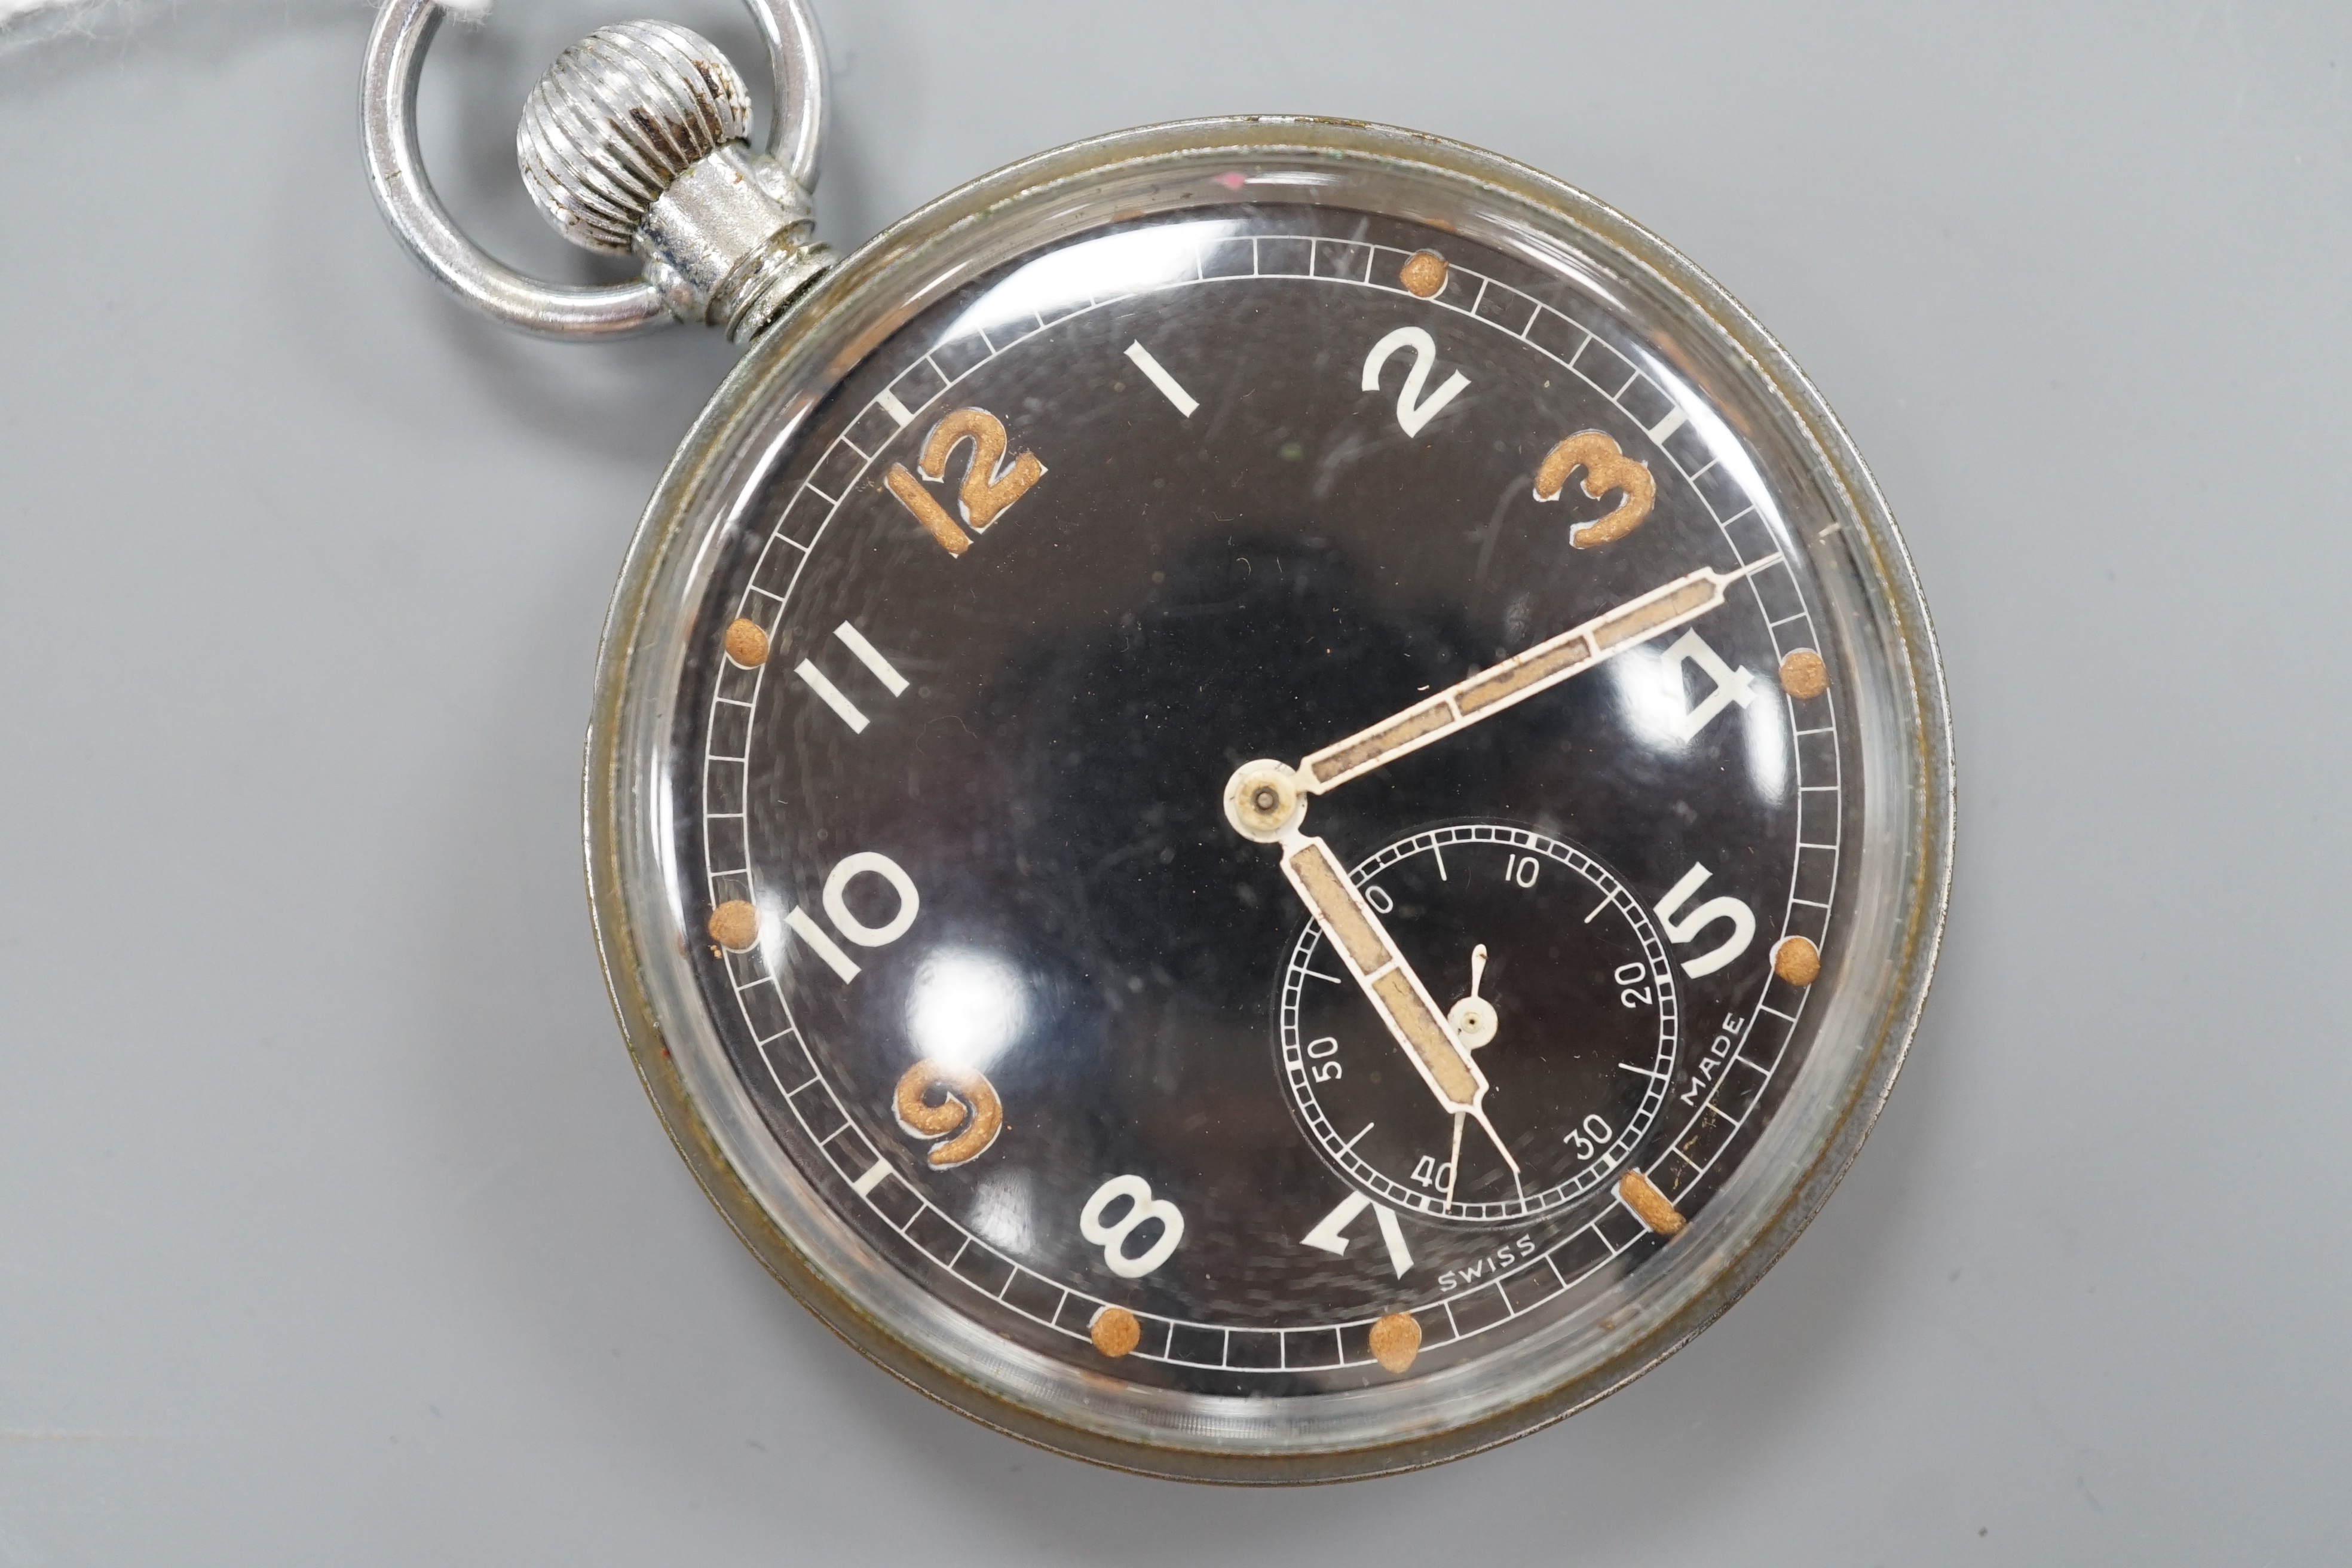 A military issue chrome cased keyless pocket watch, with black Arabic dial and subsidiary seconds, the case back engraved with broad arrow G.S.T.P. over Q 8315.